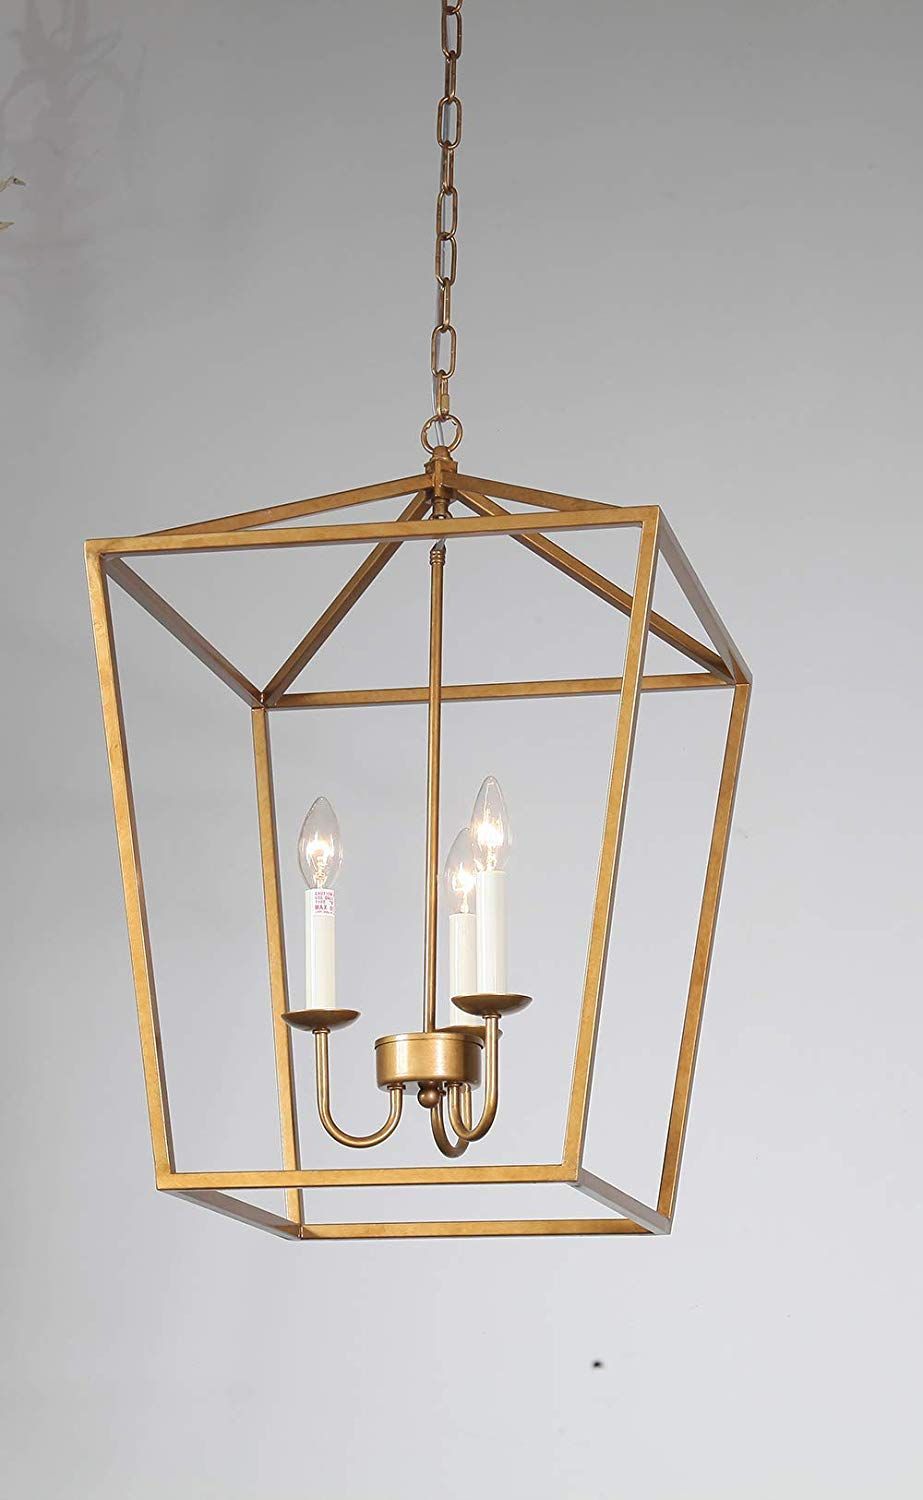 Foyer Lantern Pendant Light Fixture, Dst Gold Iron Cage Chandelier  Industrial Led Ceiling Lighting, Size: D17'' H25'' Chain 45'' | Lantern  Pendant Lighting, Pendant Light, Pendant Light Fixtures Throughout Brass Lantern Chandeliers (View 1 of 15)